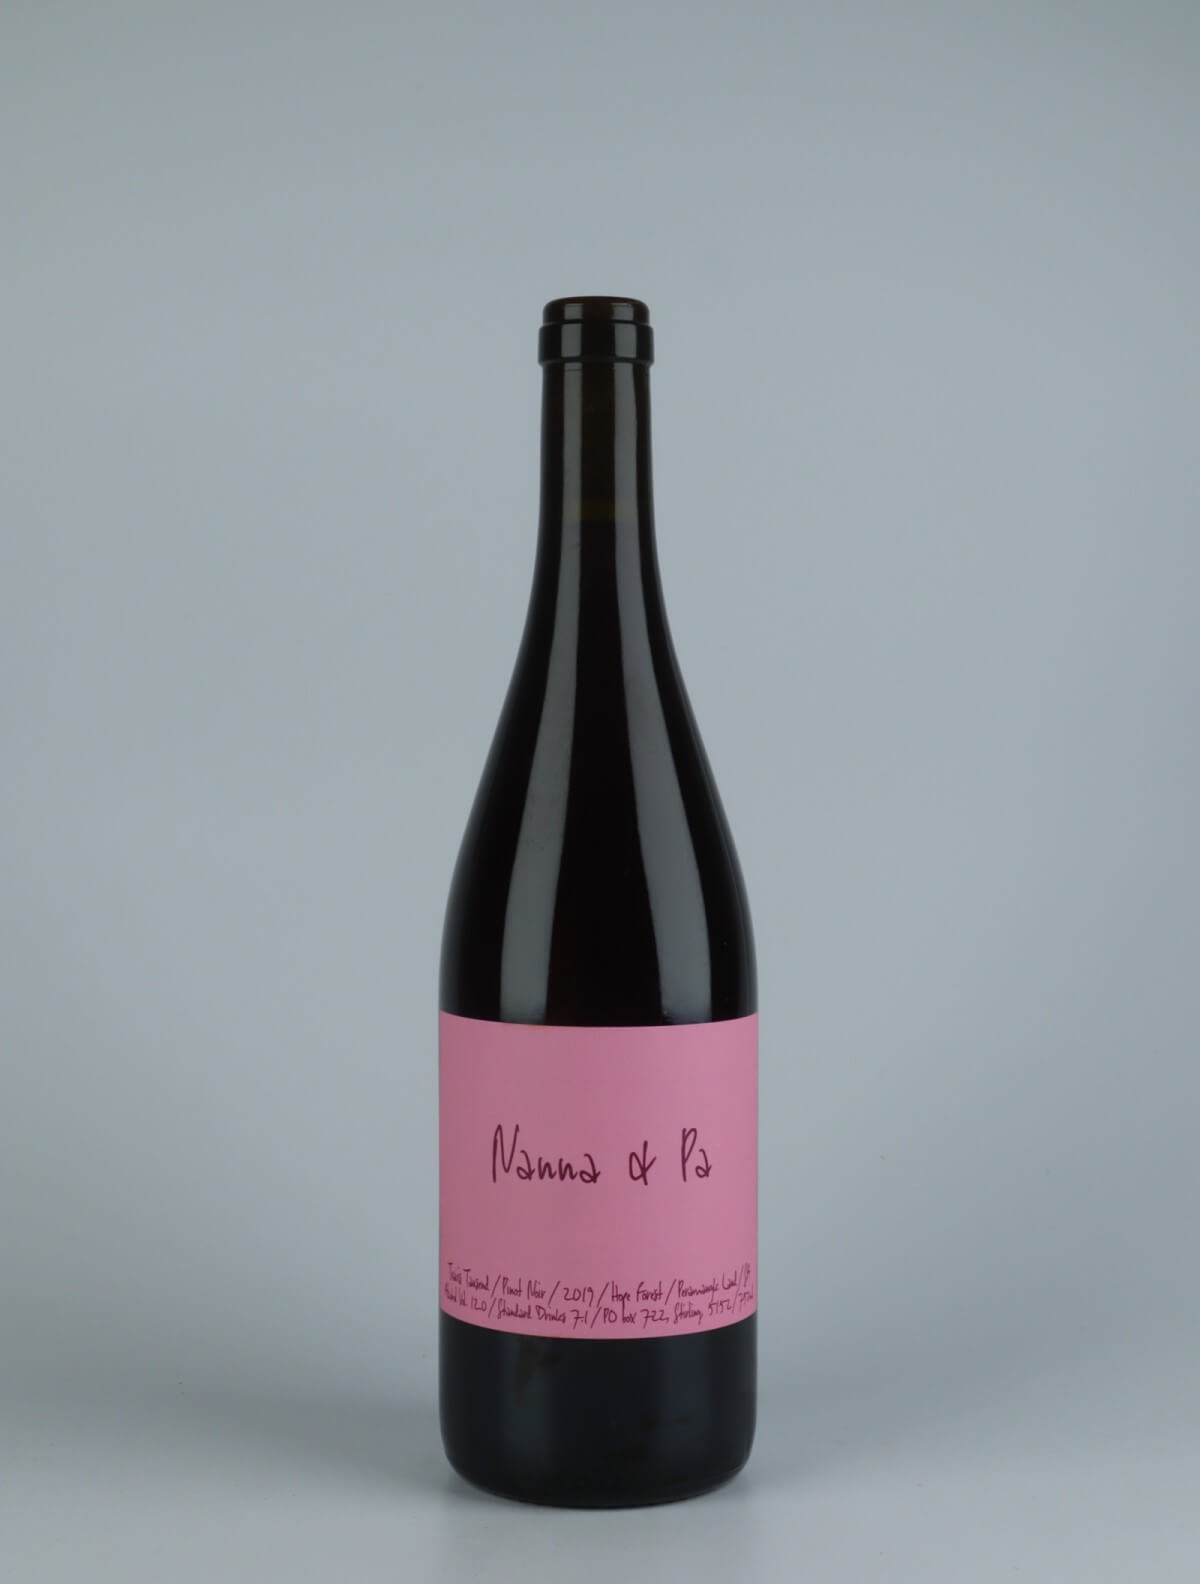 A bottle 2019 Nanna & Pa Pinot Noir Red wine from Travis Tausend, Adelaide Hills in Australia